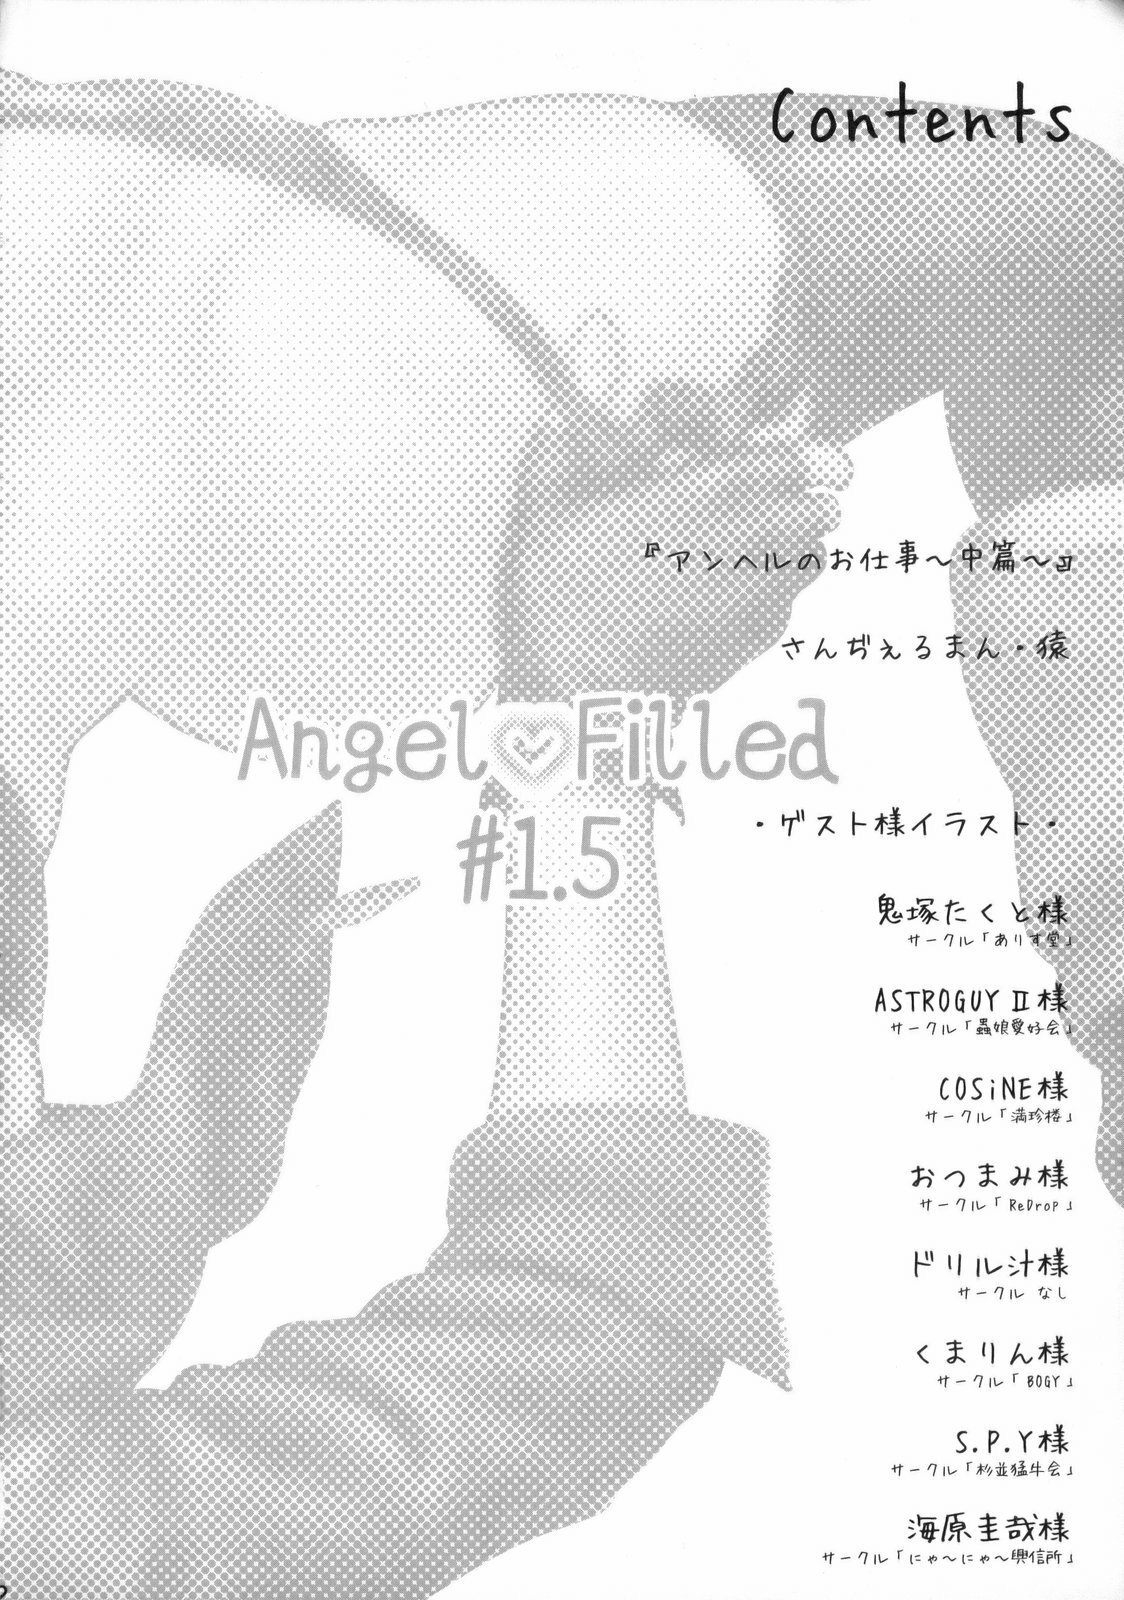 (C75) [Shinnihon Pepsitou (St.germain-sal)] Angel Filled #1.5 (King of Fighters) page 3 full